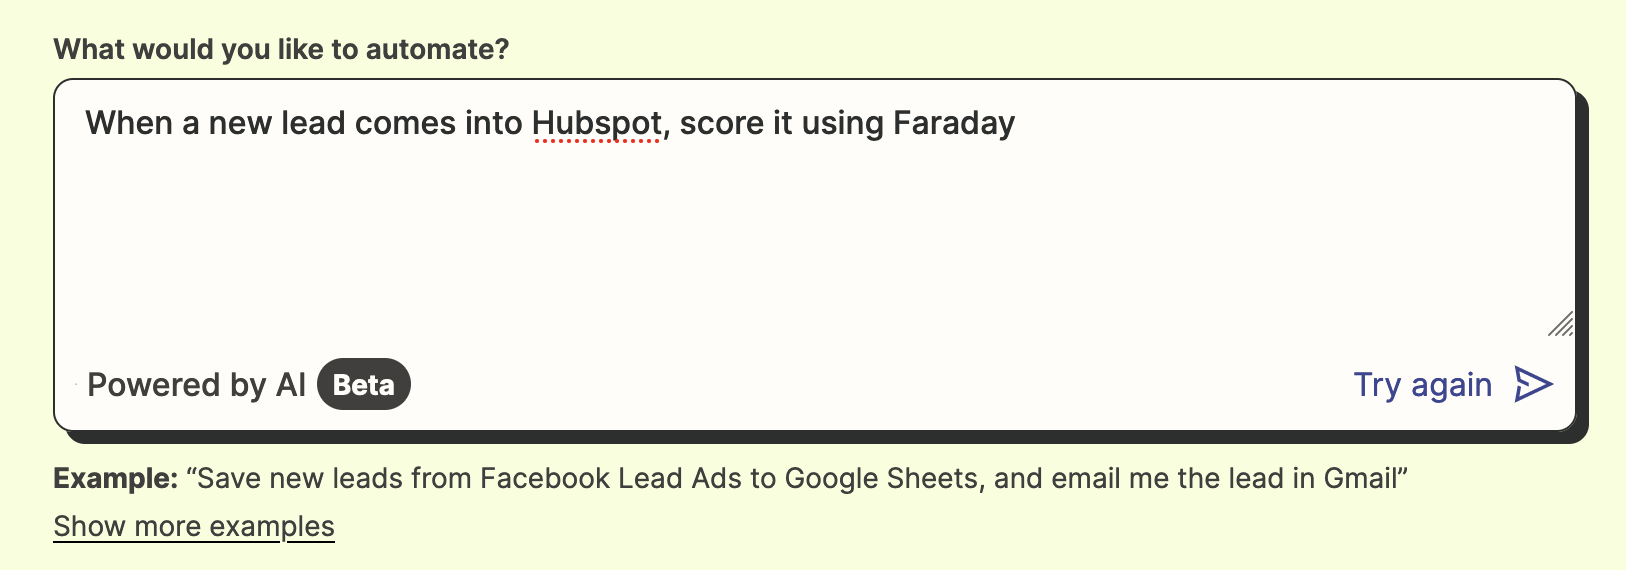 Zapier prompt saying "When a new lead comes into HubSpot, score it using Faraday"